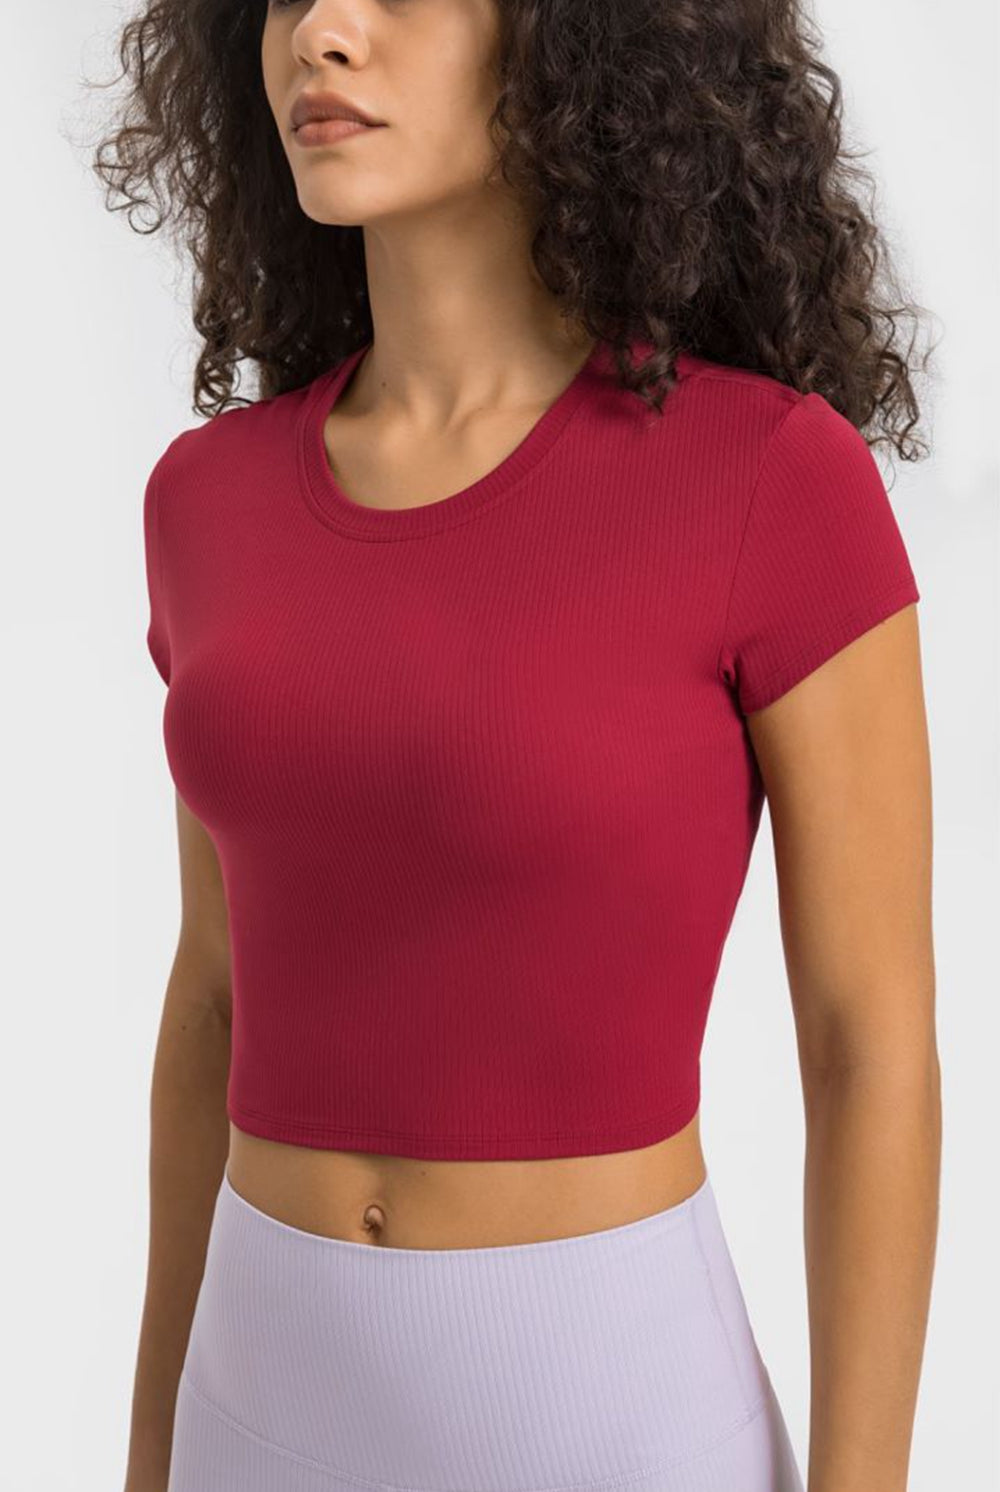 Brown Round Neck Short Sleeve Cropped Sports T-Shirt activewear